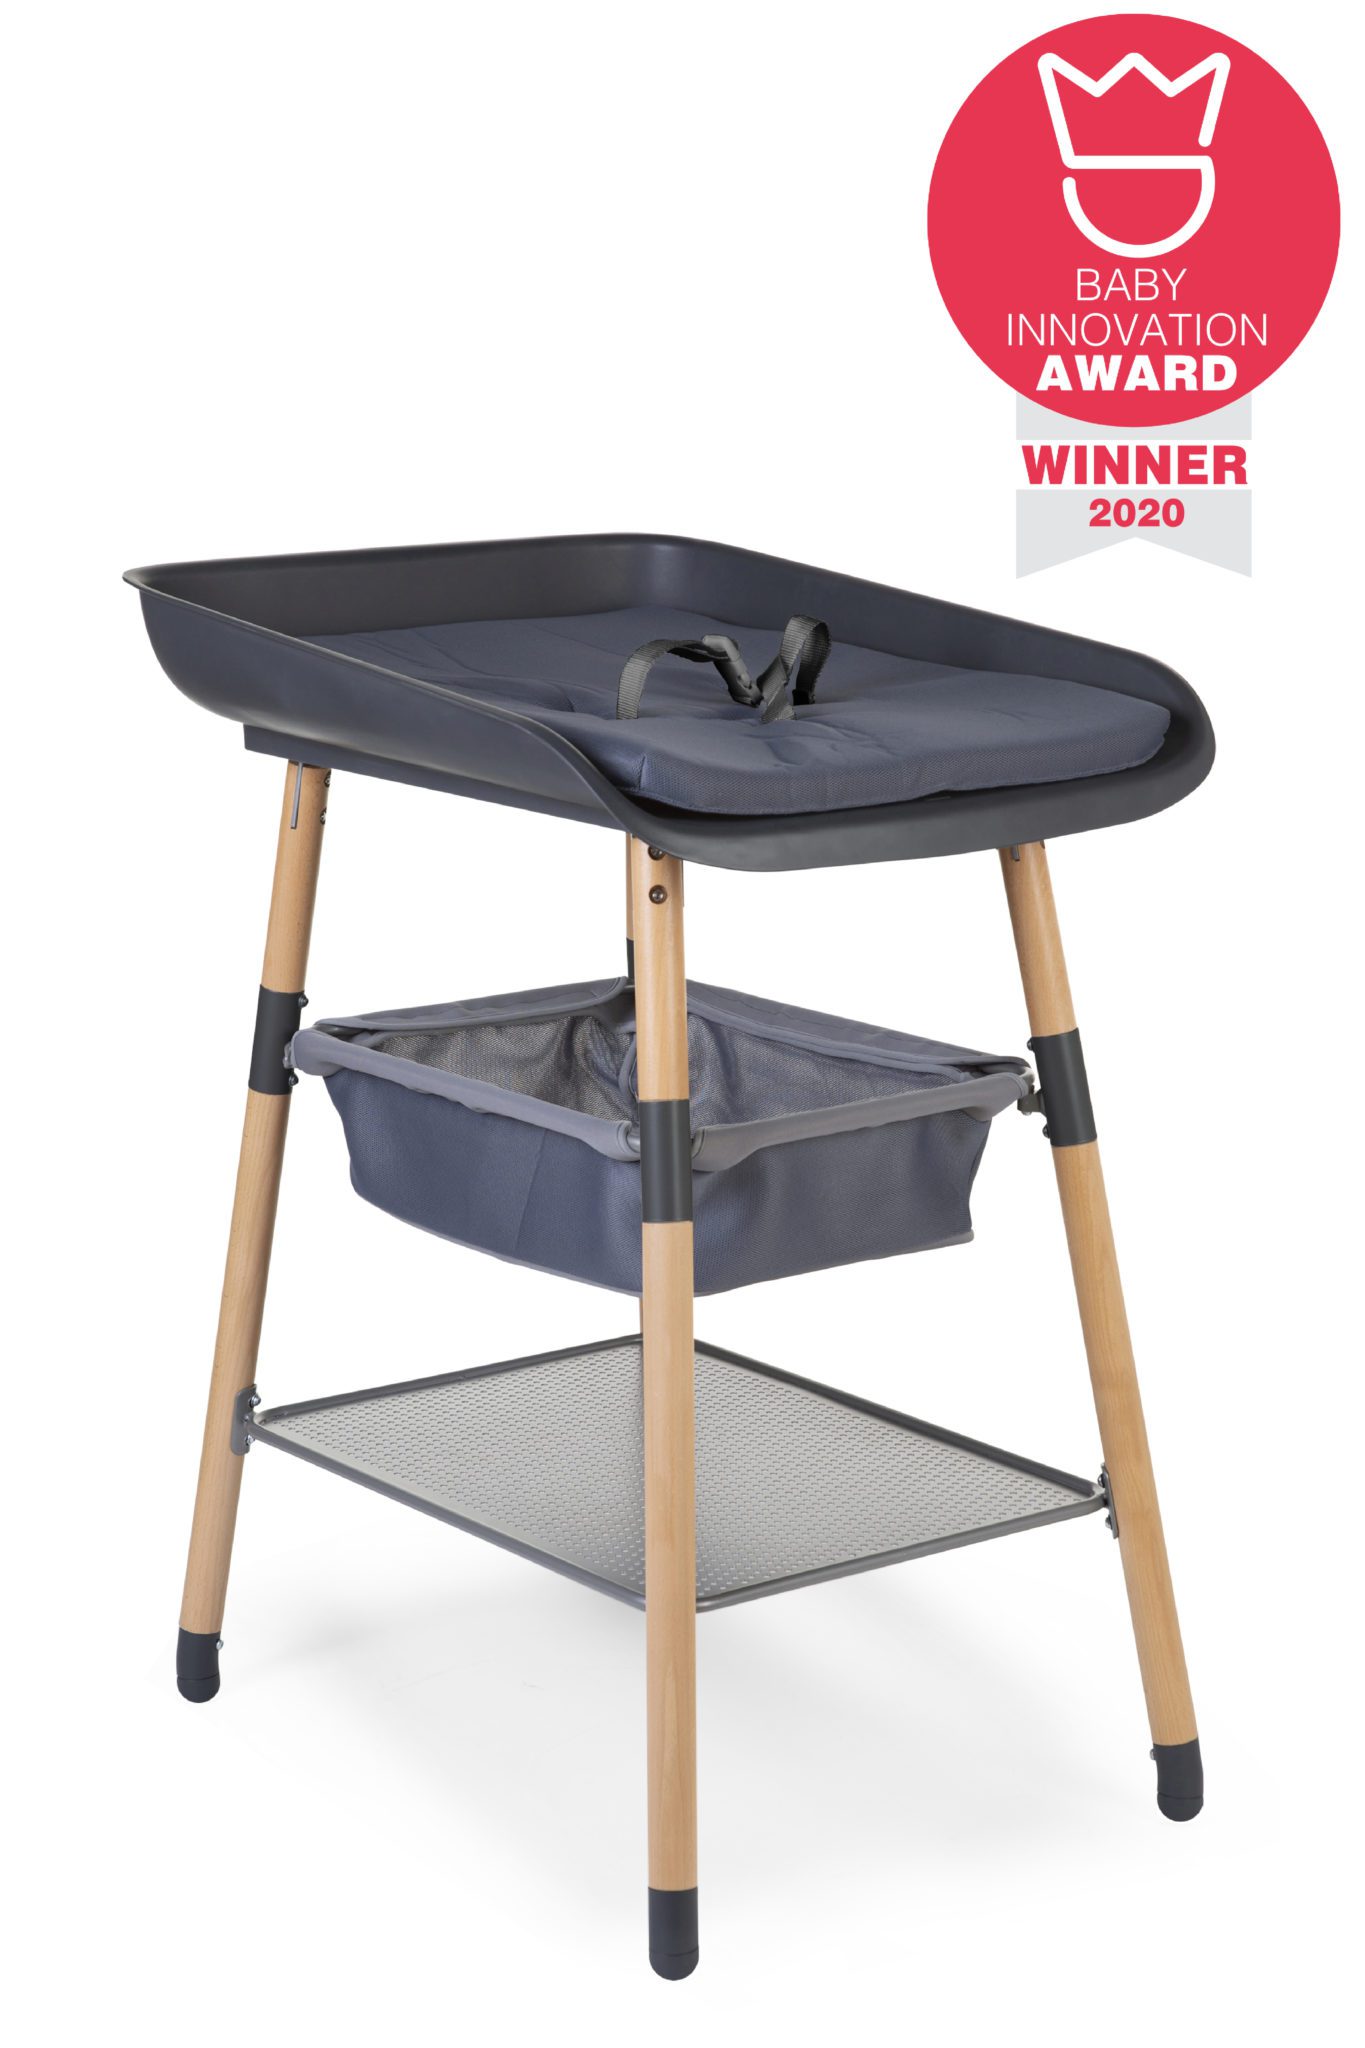 New Evolux Changing Table wins Baby Innovation Award